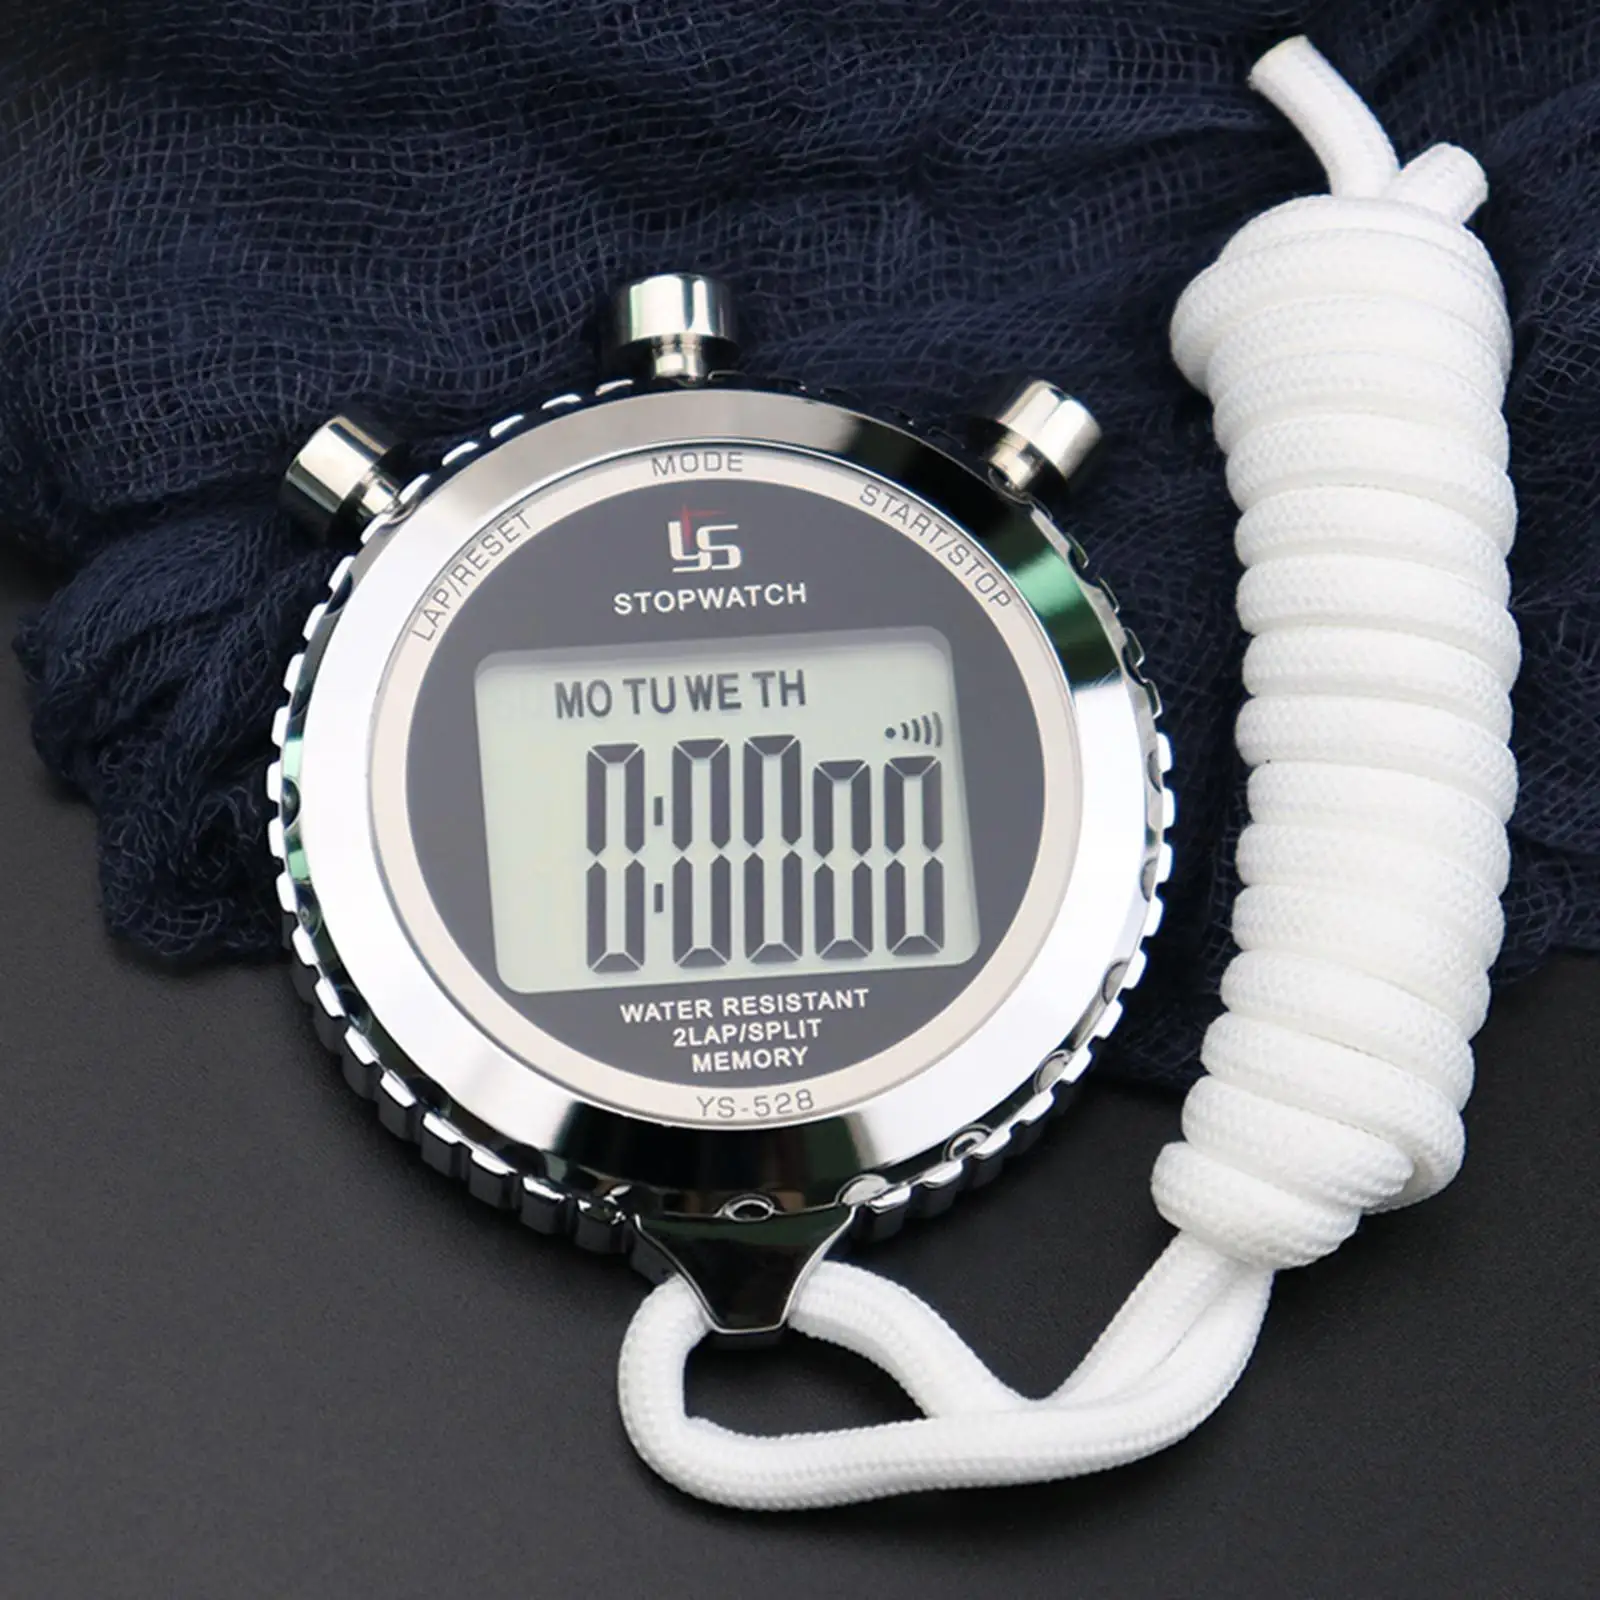 Stopwatch 0.01 Seconds Memory Stop Watch Large Display Timer Sports Counter Sports for Running Outdoor Coaches Referee Baseball